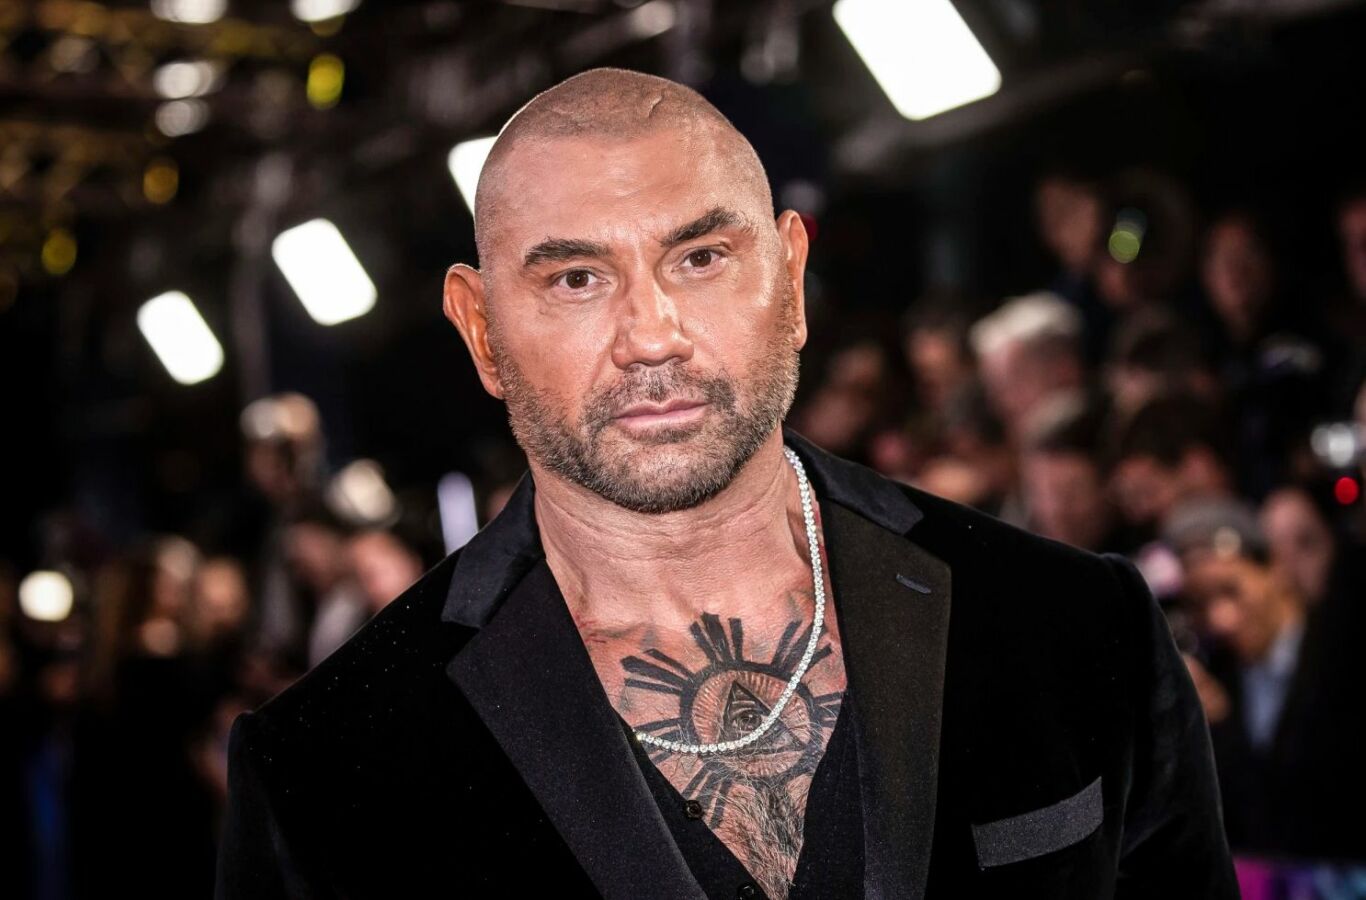 Should Dave Bautista play Bane in the new DCU? : r/batman